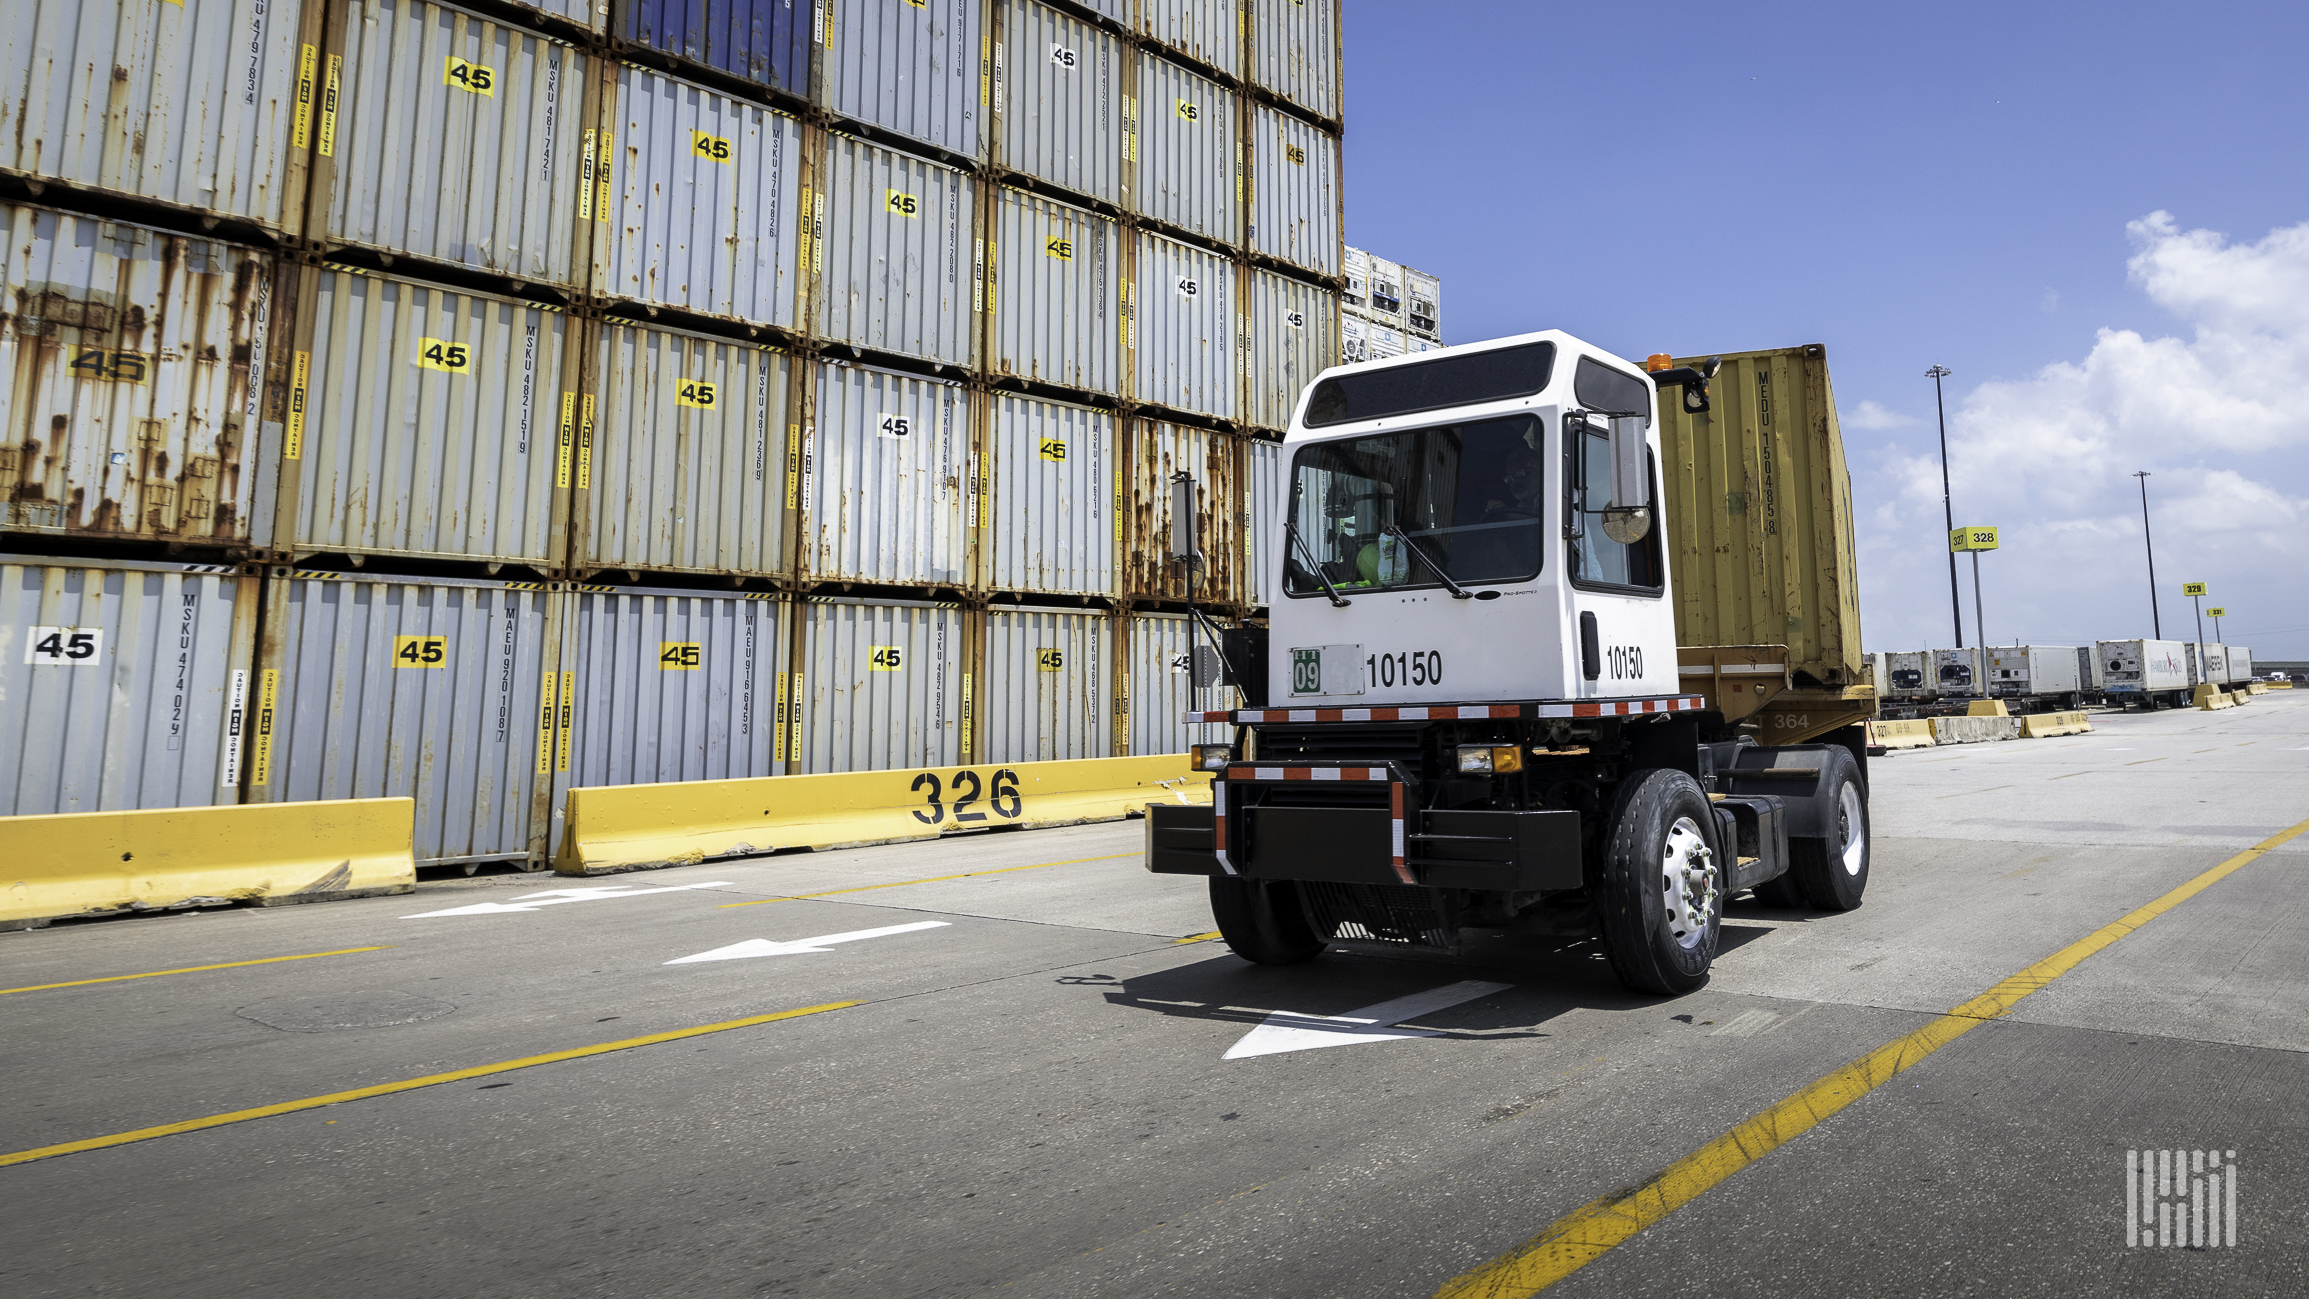 A terminal tractor moves a container at a port with shipping containers in the background.